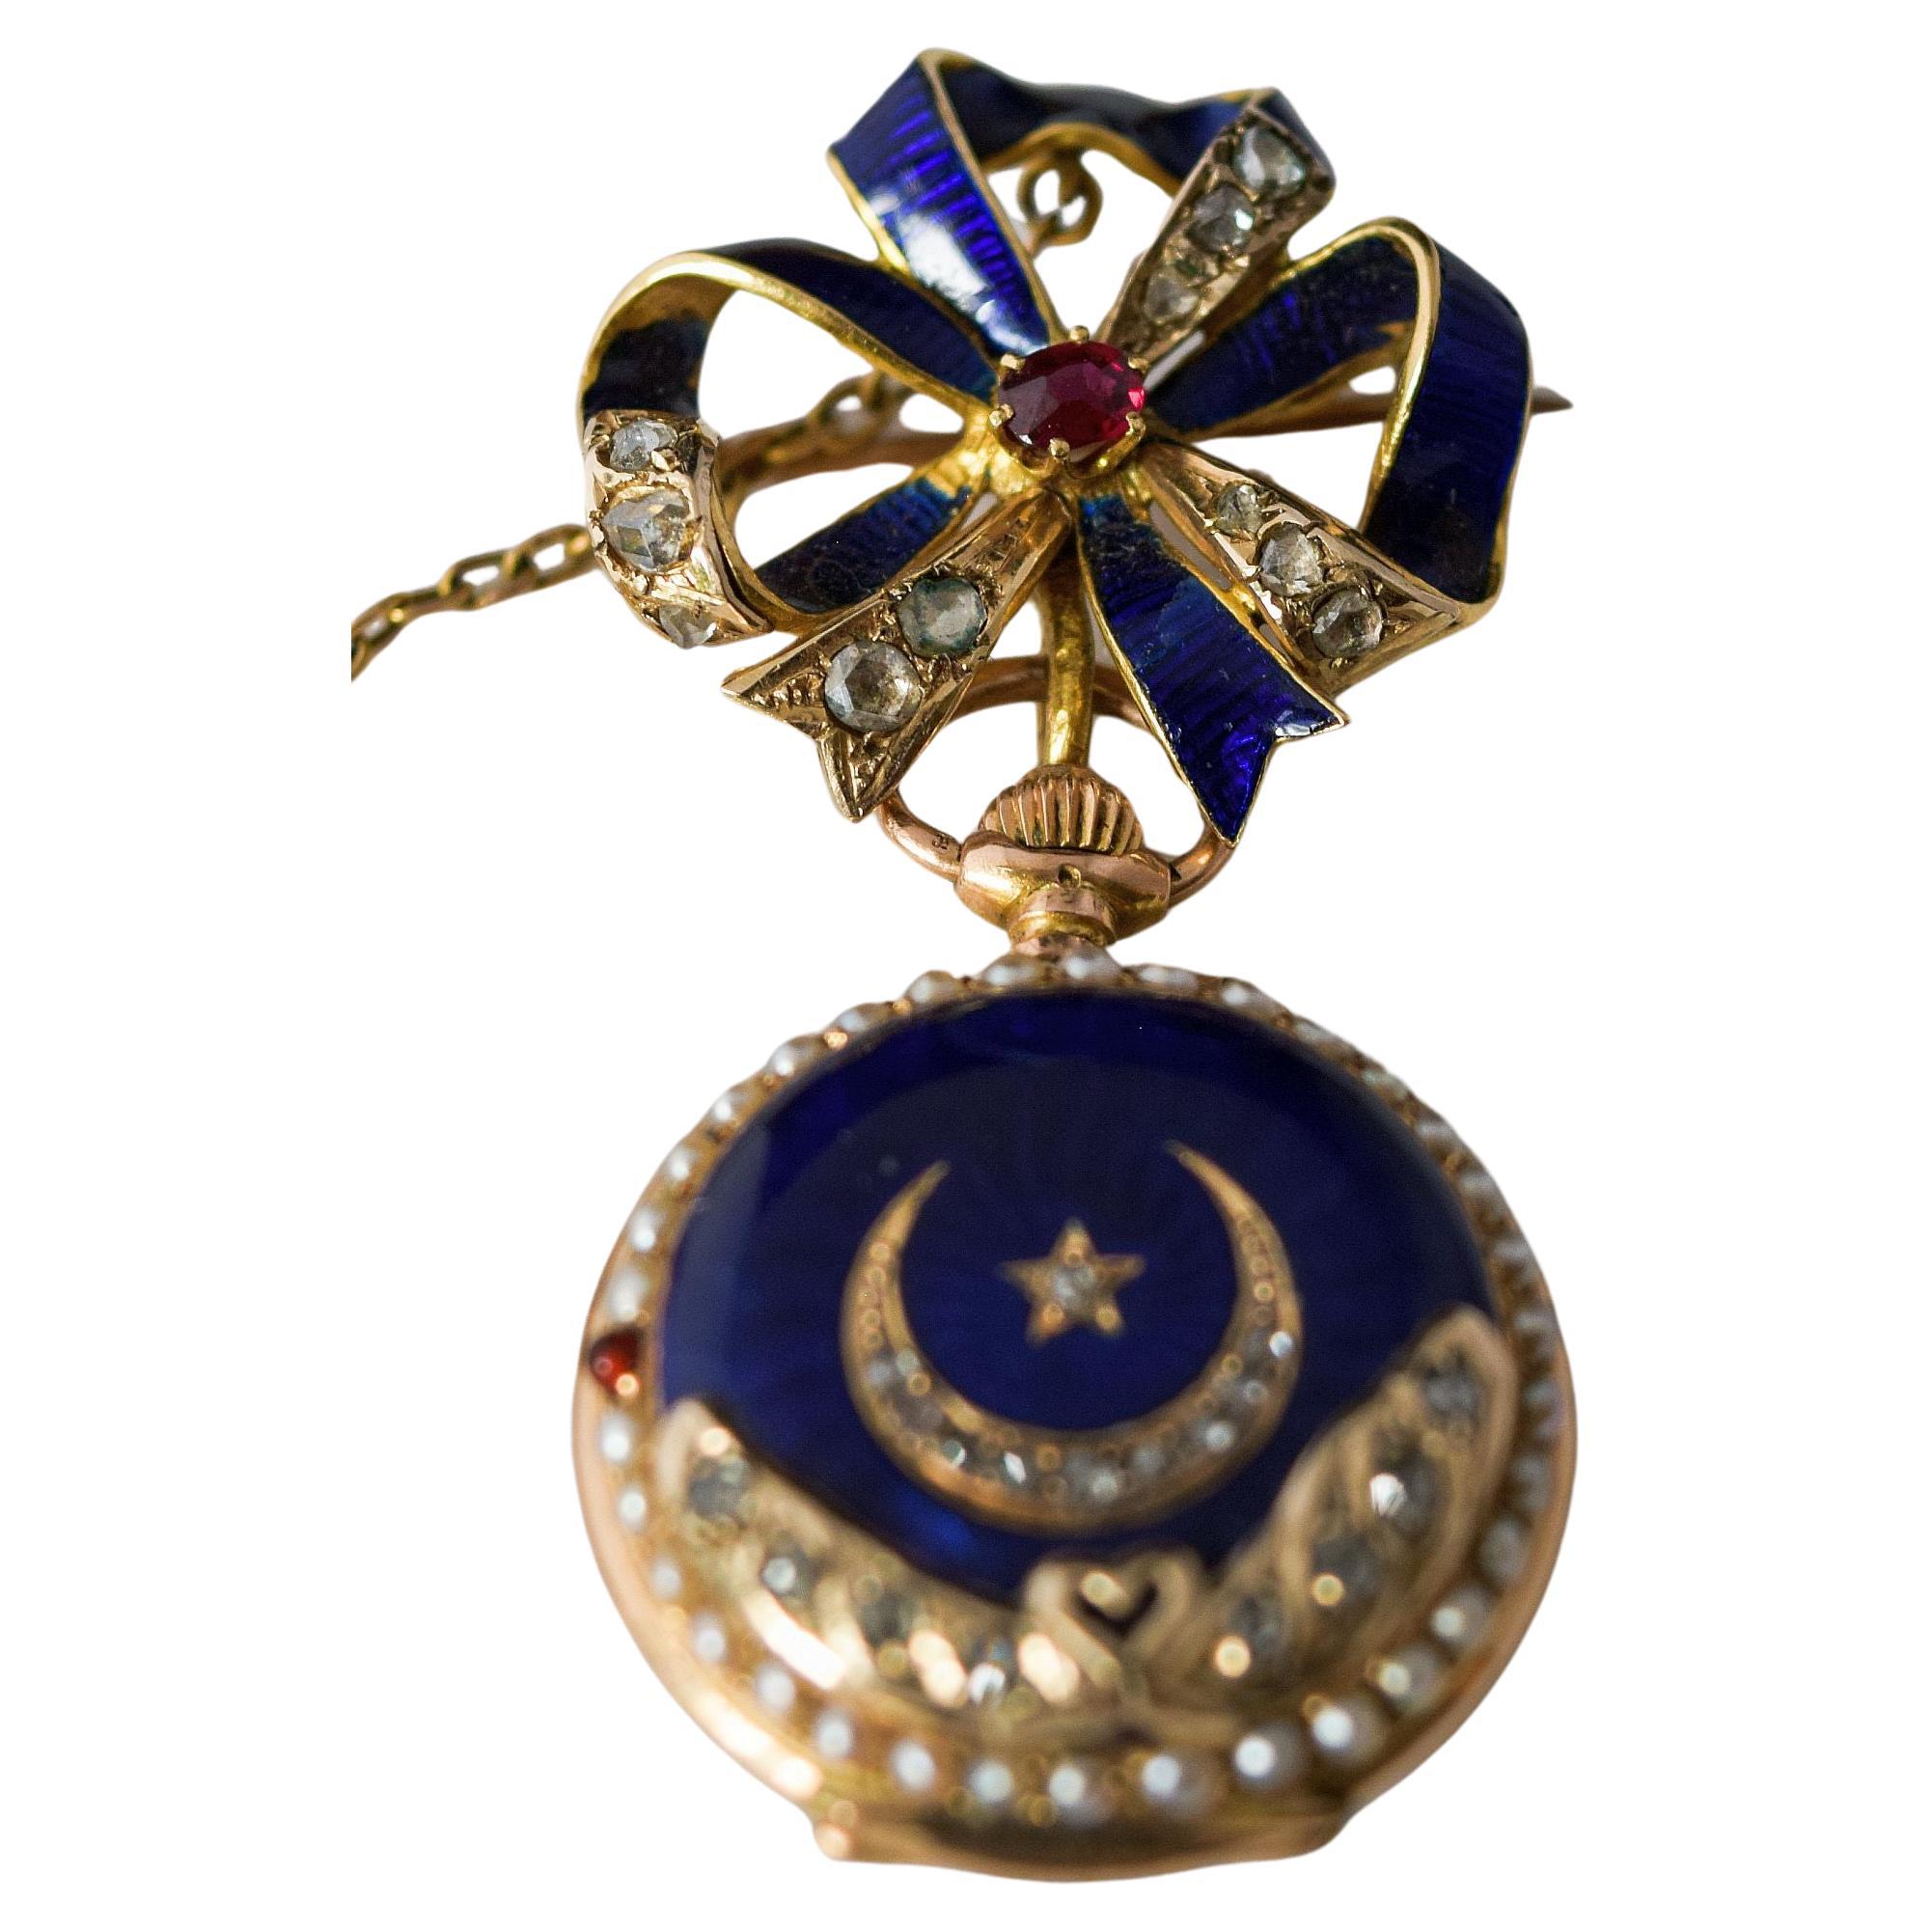 Attractive Enamel and diamond Hunter cased fob watch 18 K
The blue enamel front of the watch has a moon and a crown set with diamonds.
Below section of the front has further inlaid diamonds with a little gold heart where
diamonds meet from both